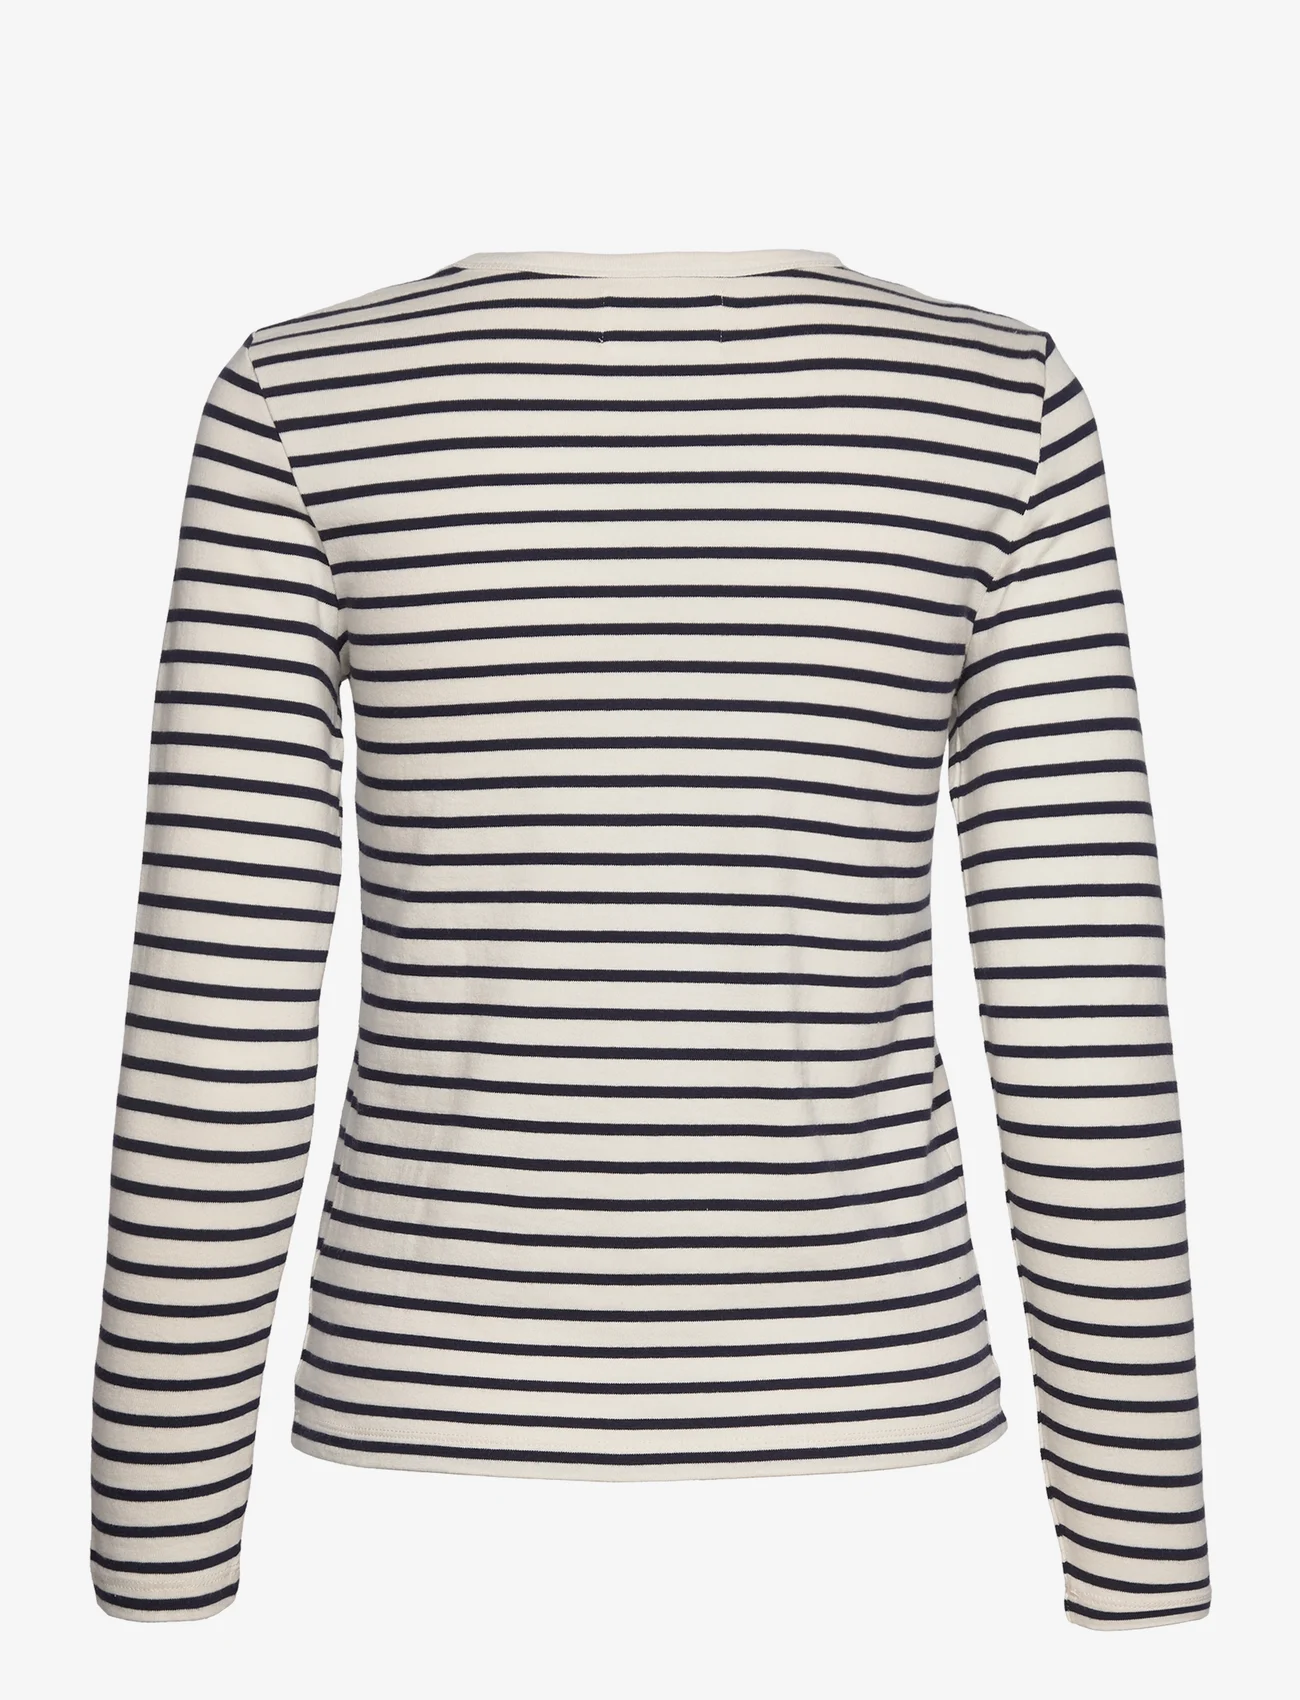 Double A by Wood Wood - Moa stripe long sleeve GOTS - t-shirts & tops - off-white/navy stripes - 1